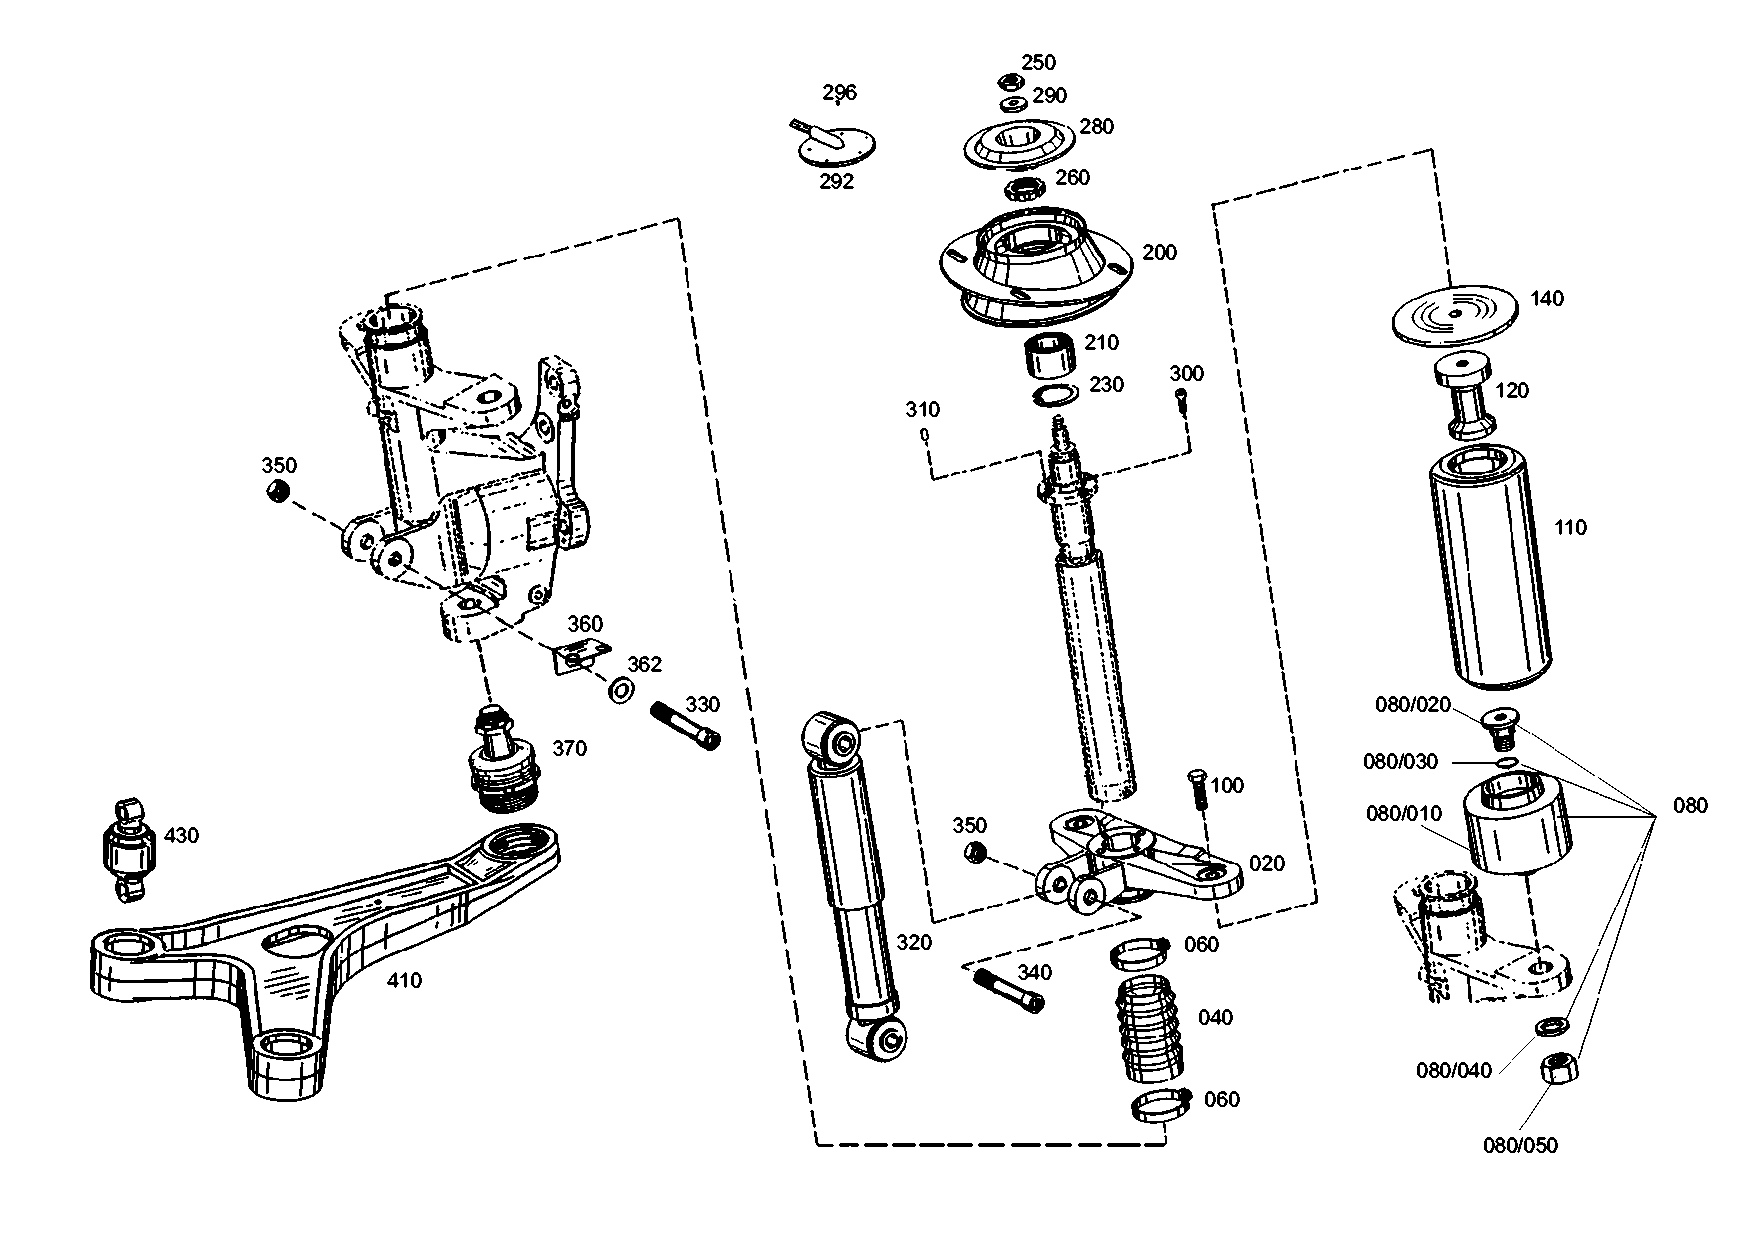 drawing for AGCO 020603R1 - HEXAGON SCREW (figure 4)